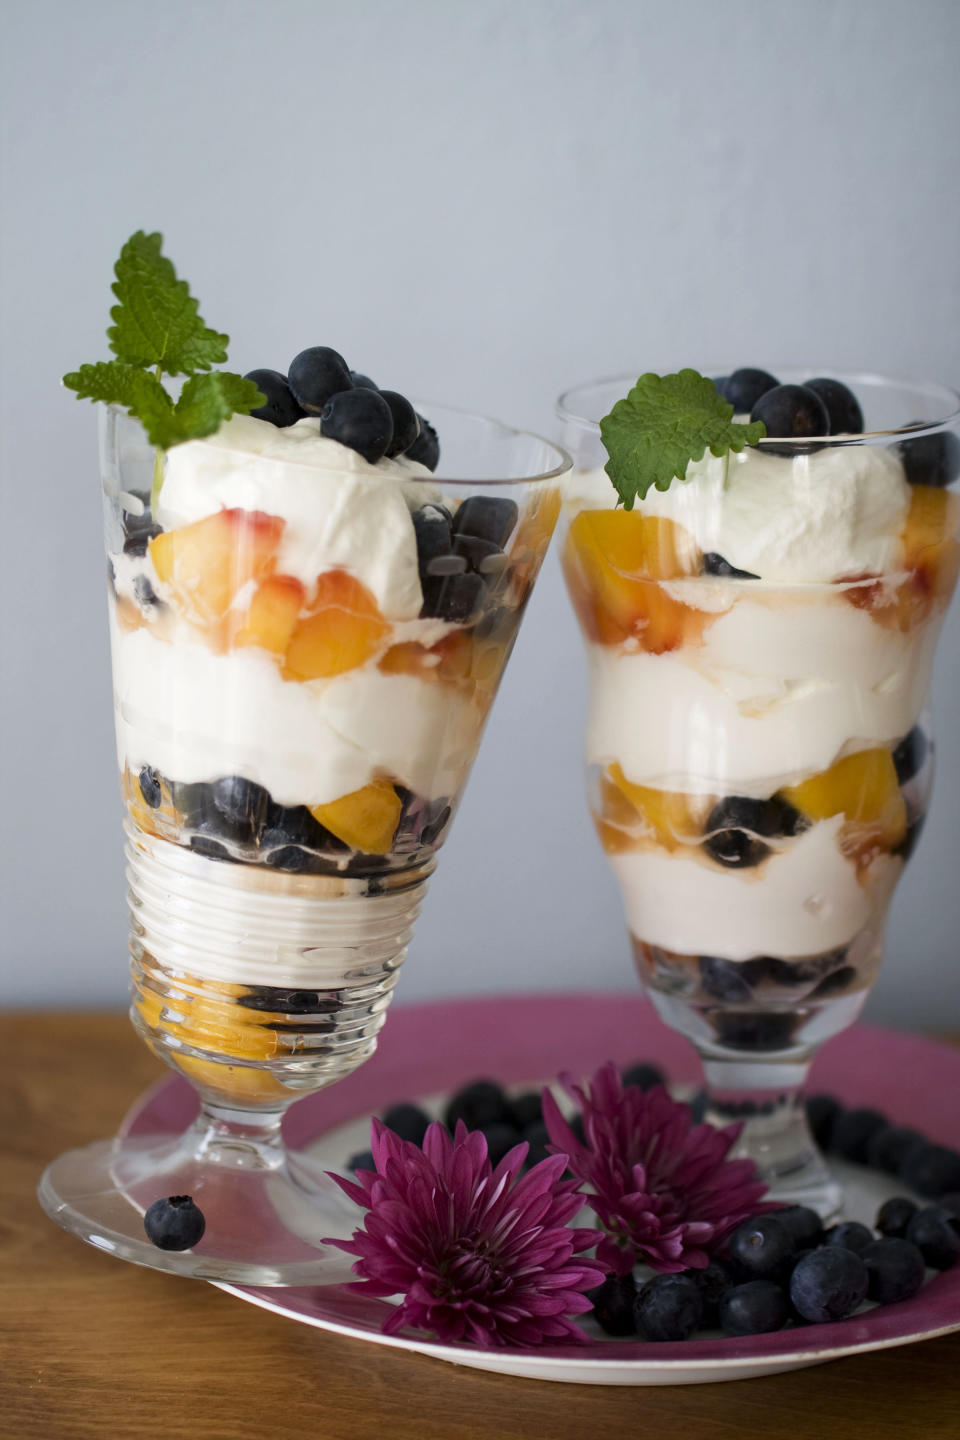 In this image taken on April 15, 2013, easy blueberry-peach mousse parfaits are shown in Concord, N.H. (AP Photo/Matthew Mead)